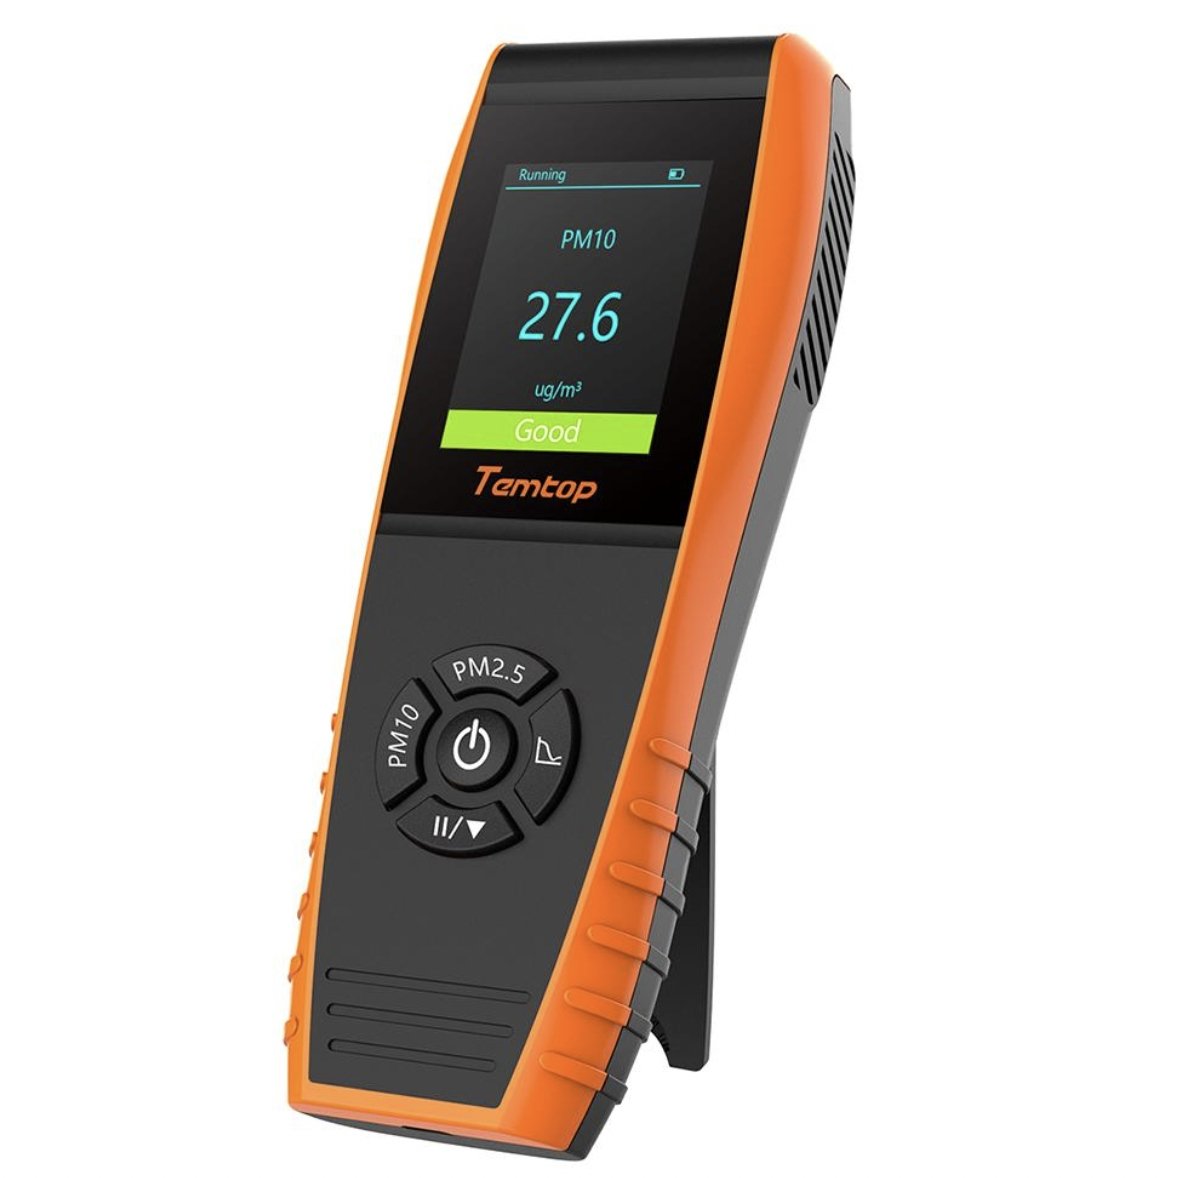 Temtop P600 Handheld PM2.5 PM10 Air Quality Monitor with Histogram - Temtop